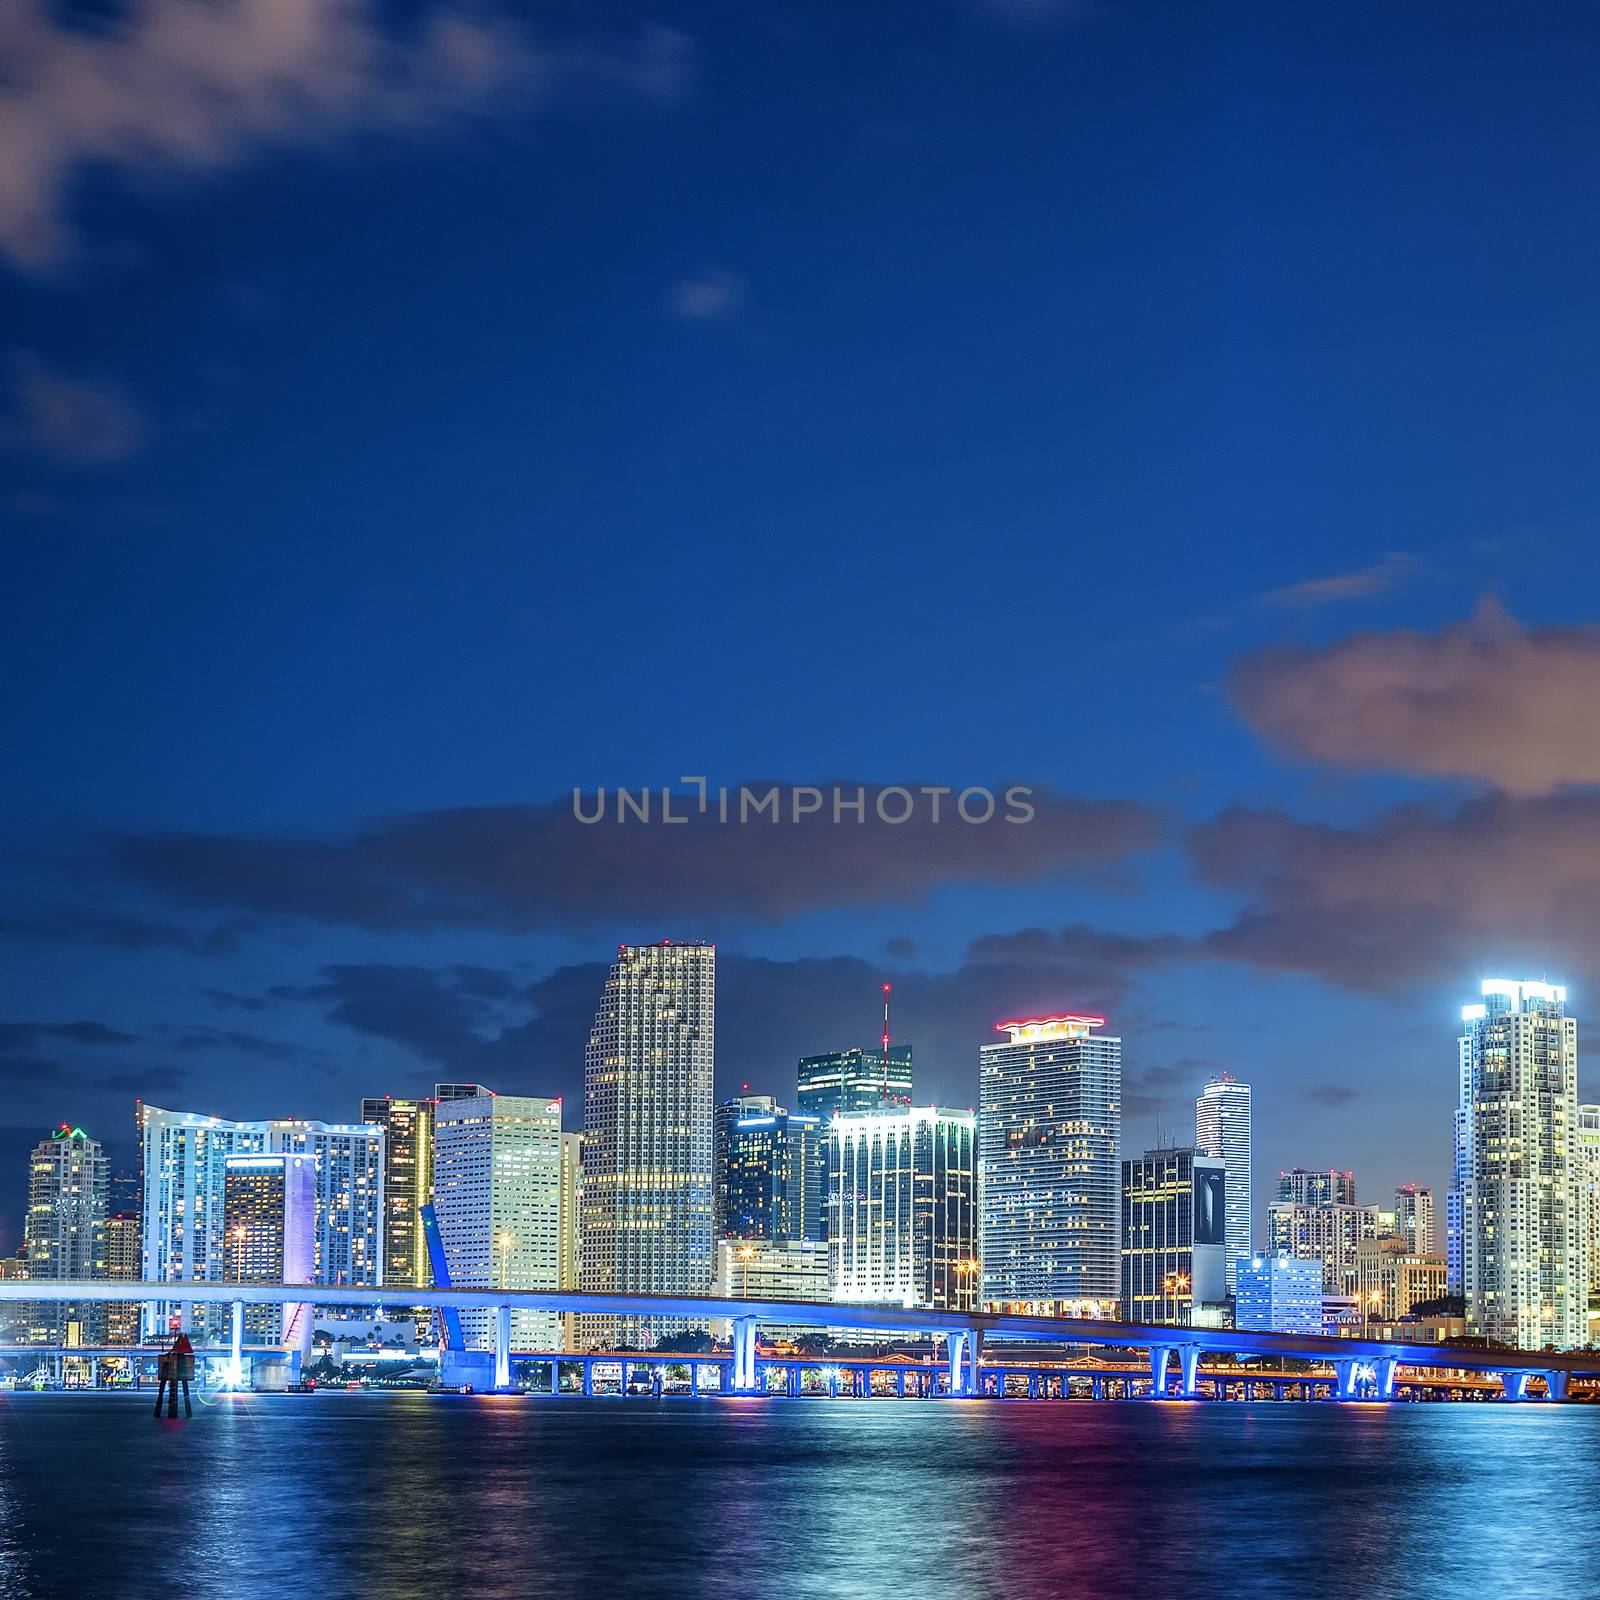 Blue Miami by vwalakte